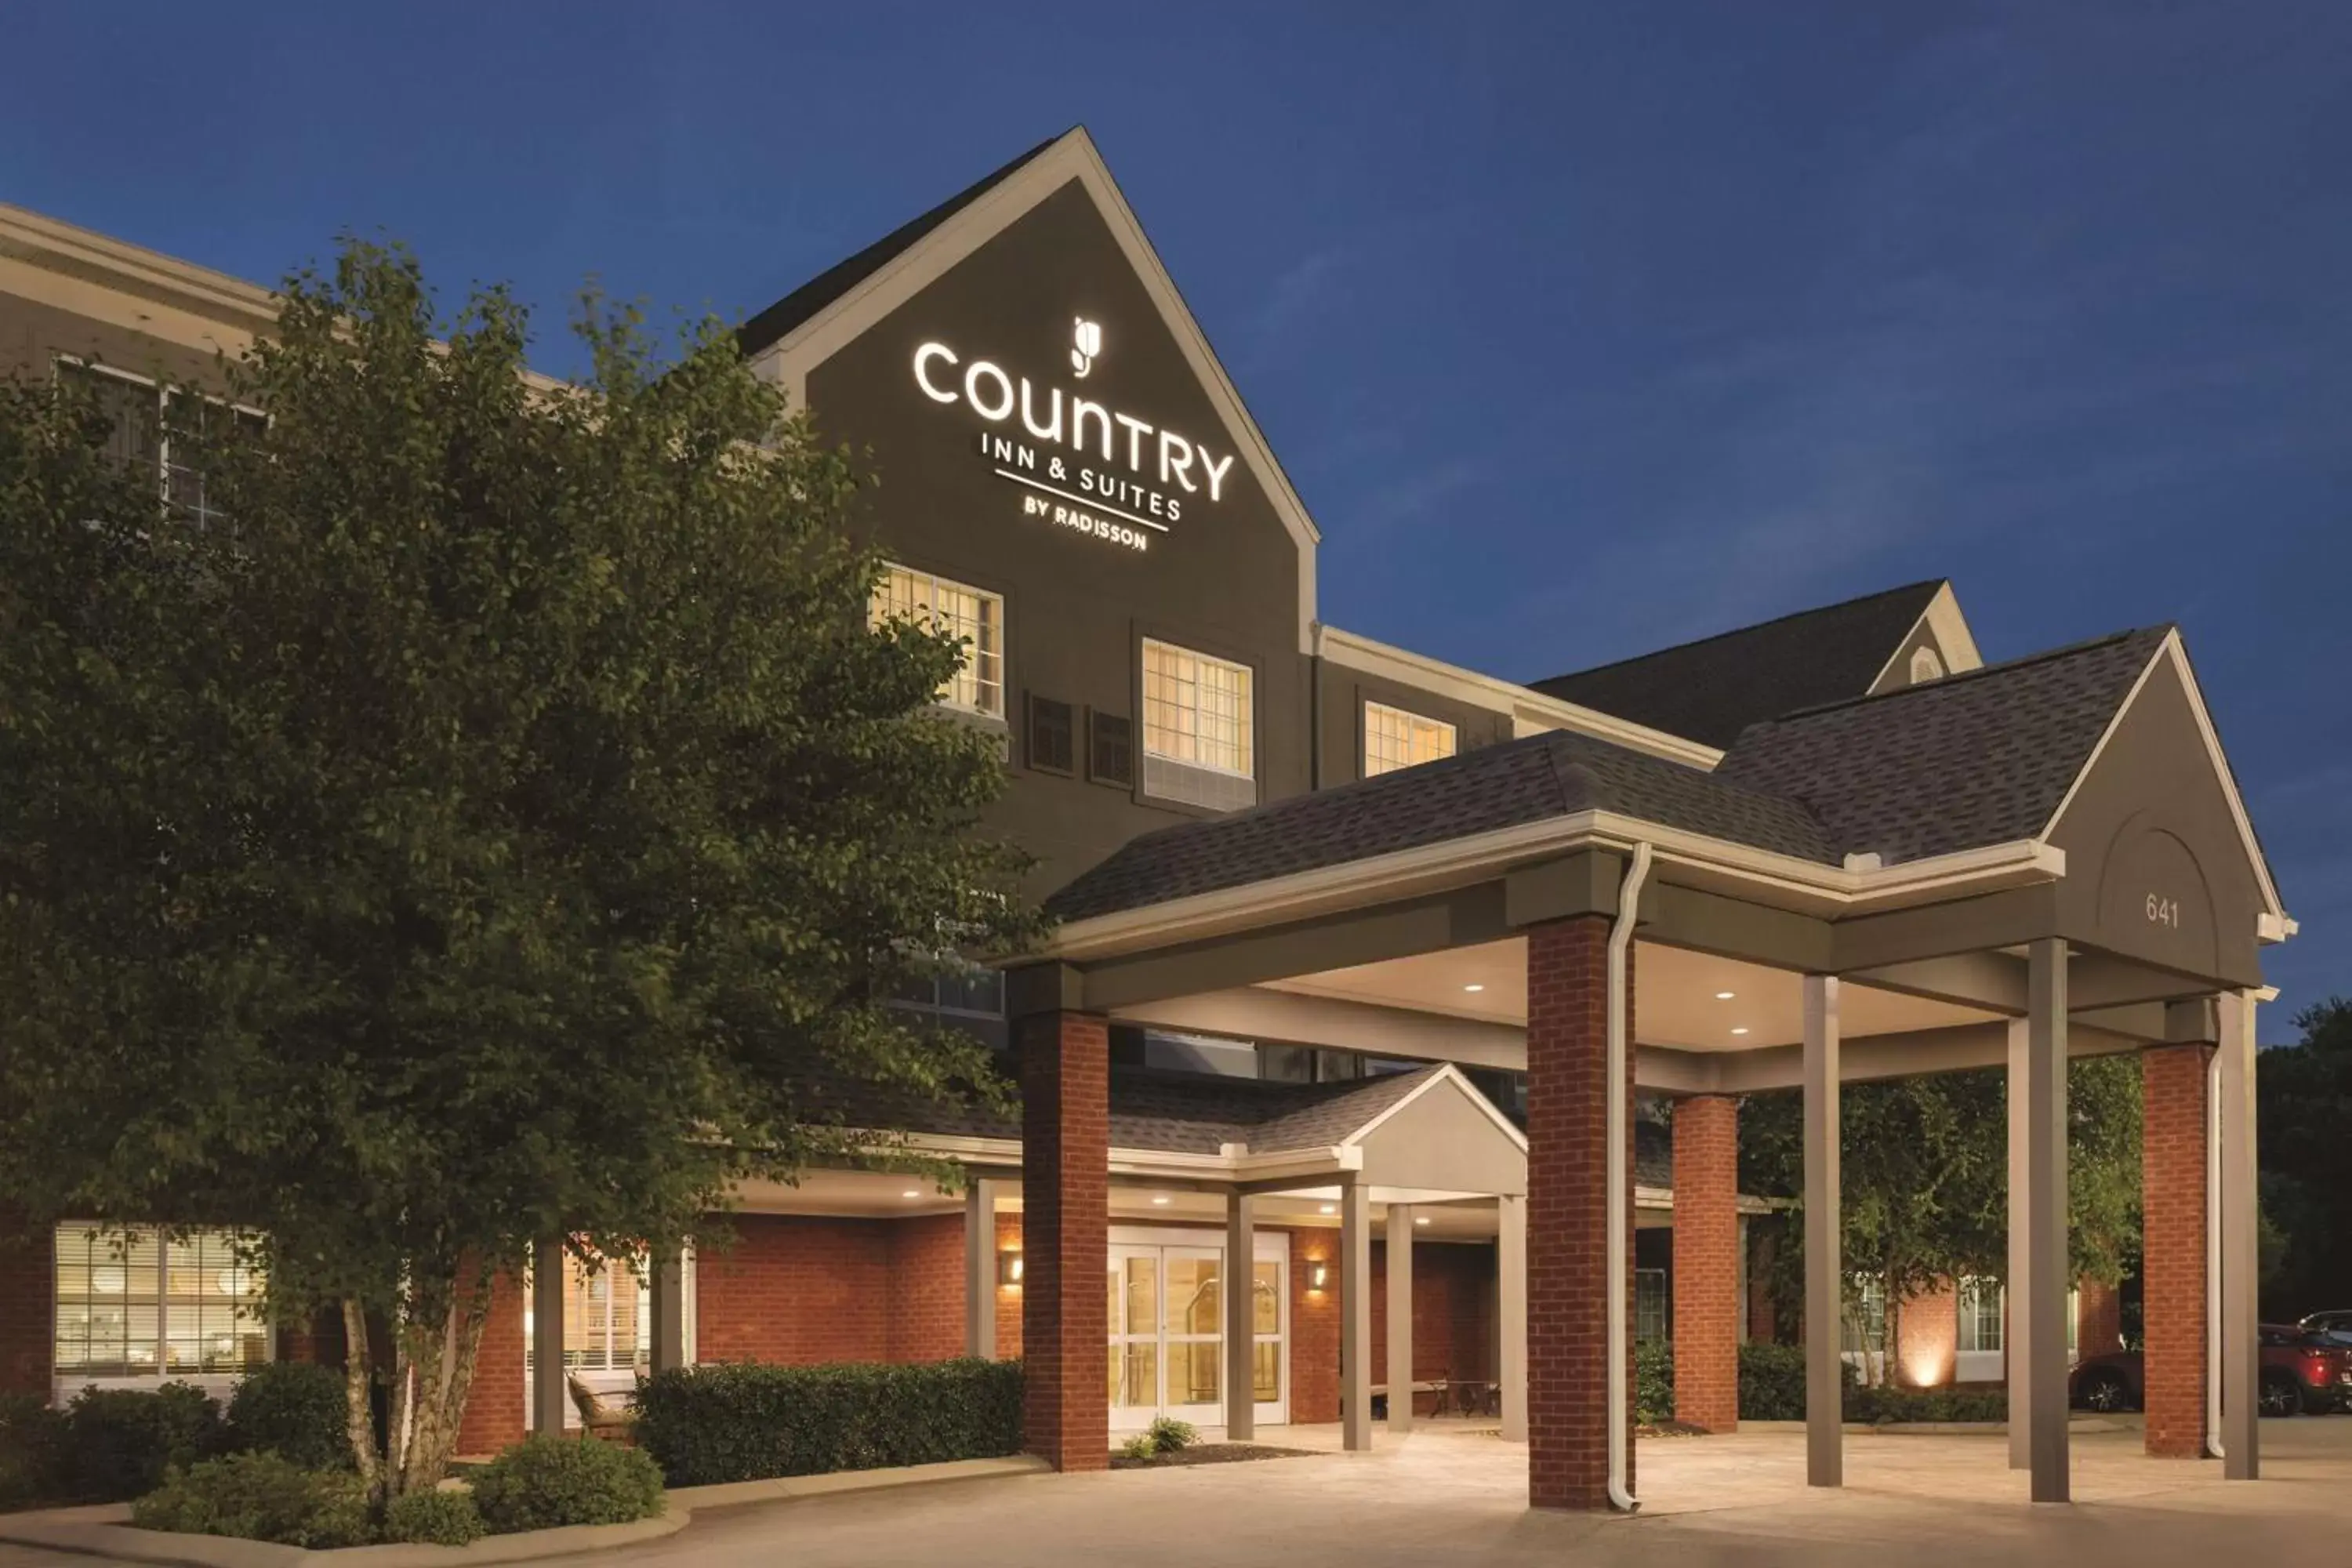 Property building in Country Inn & Suites by Radisson, Goodlettsville, TN